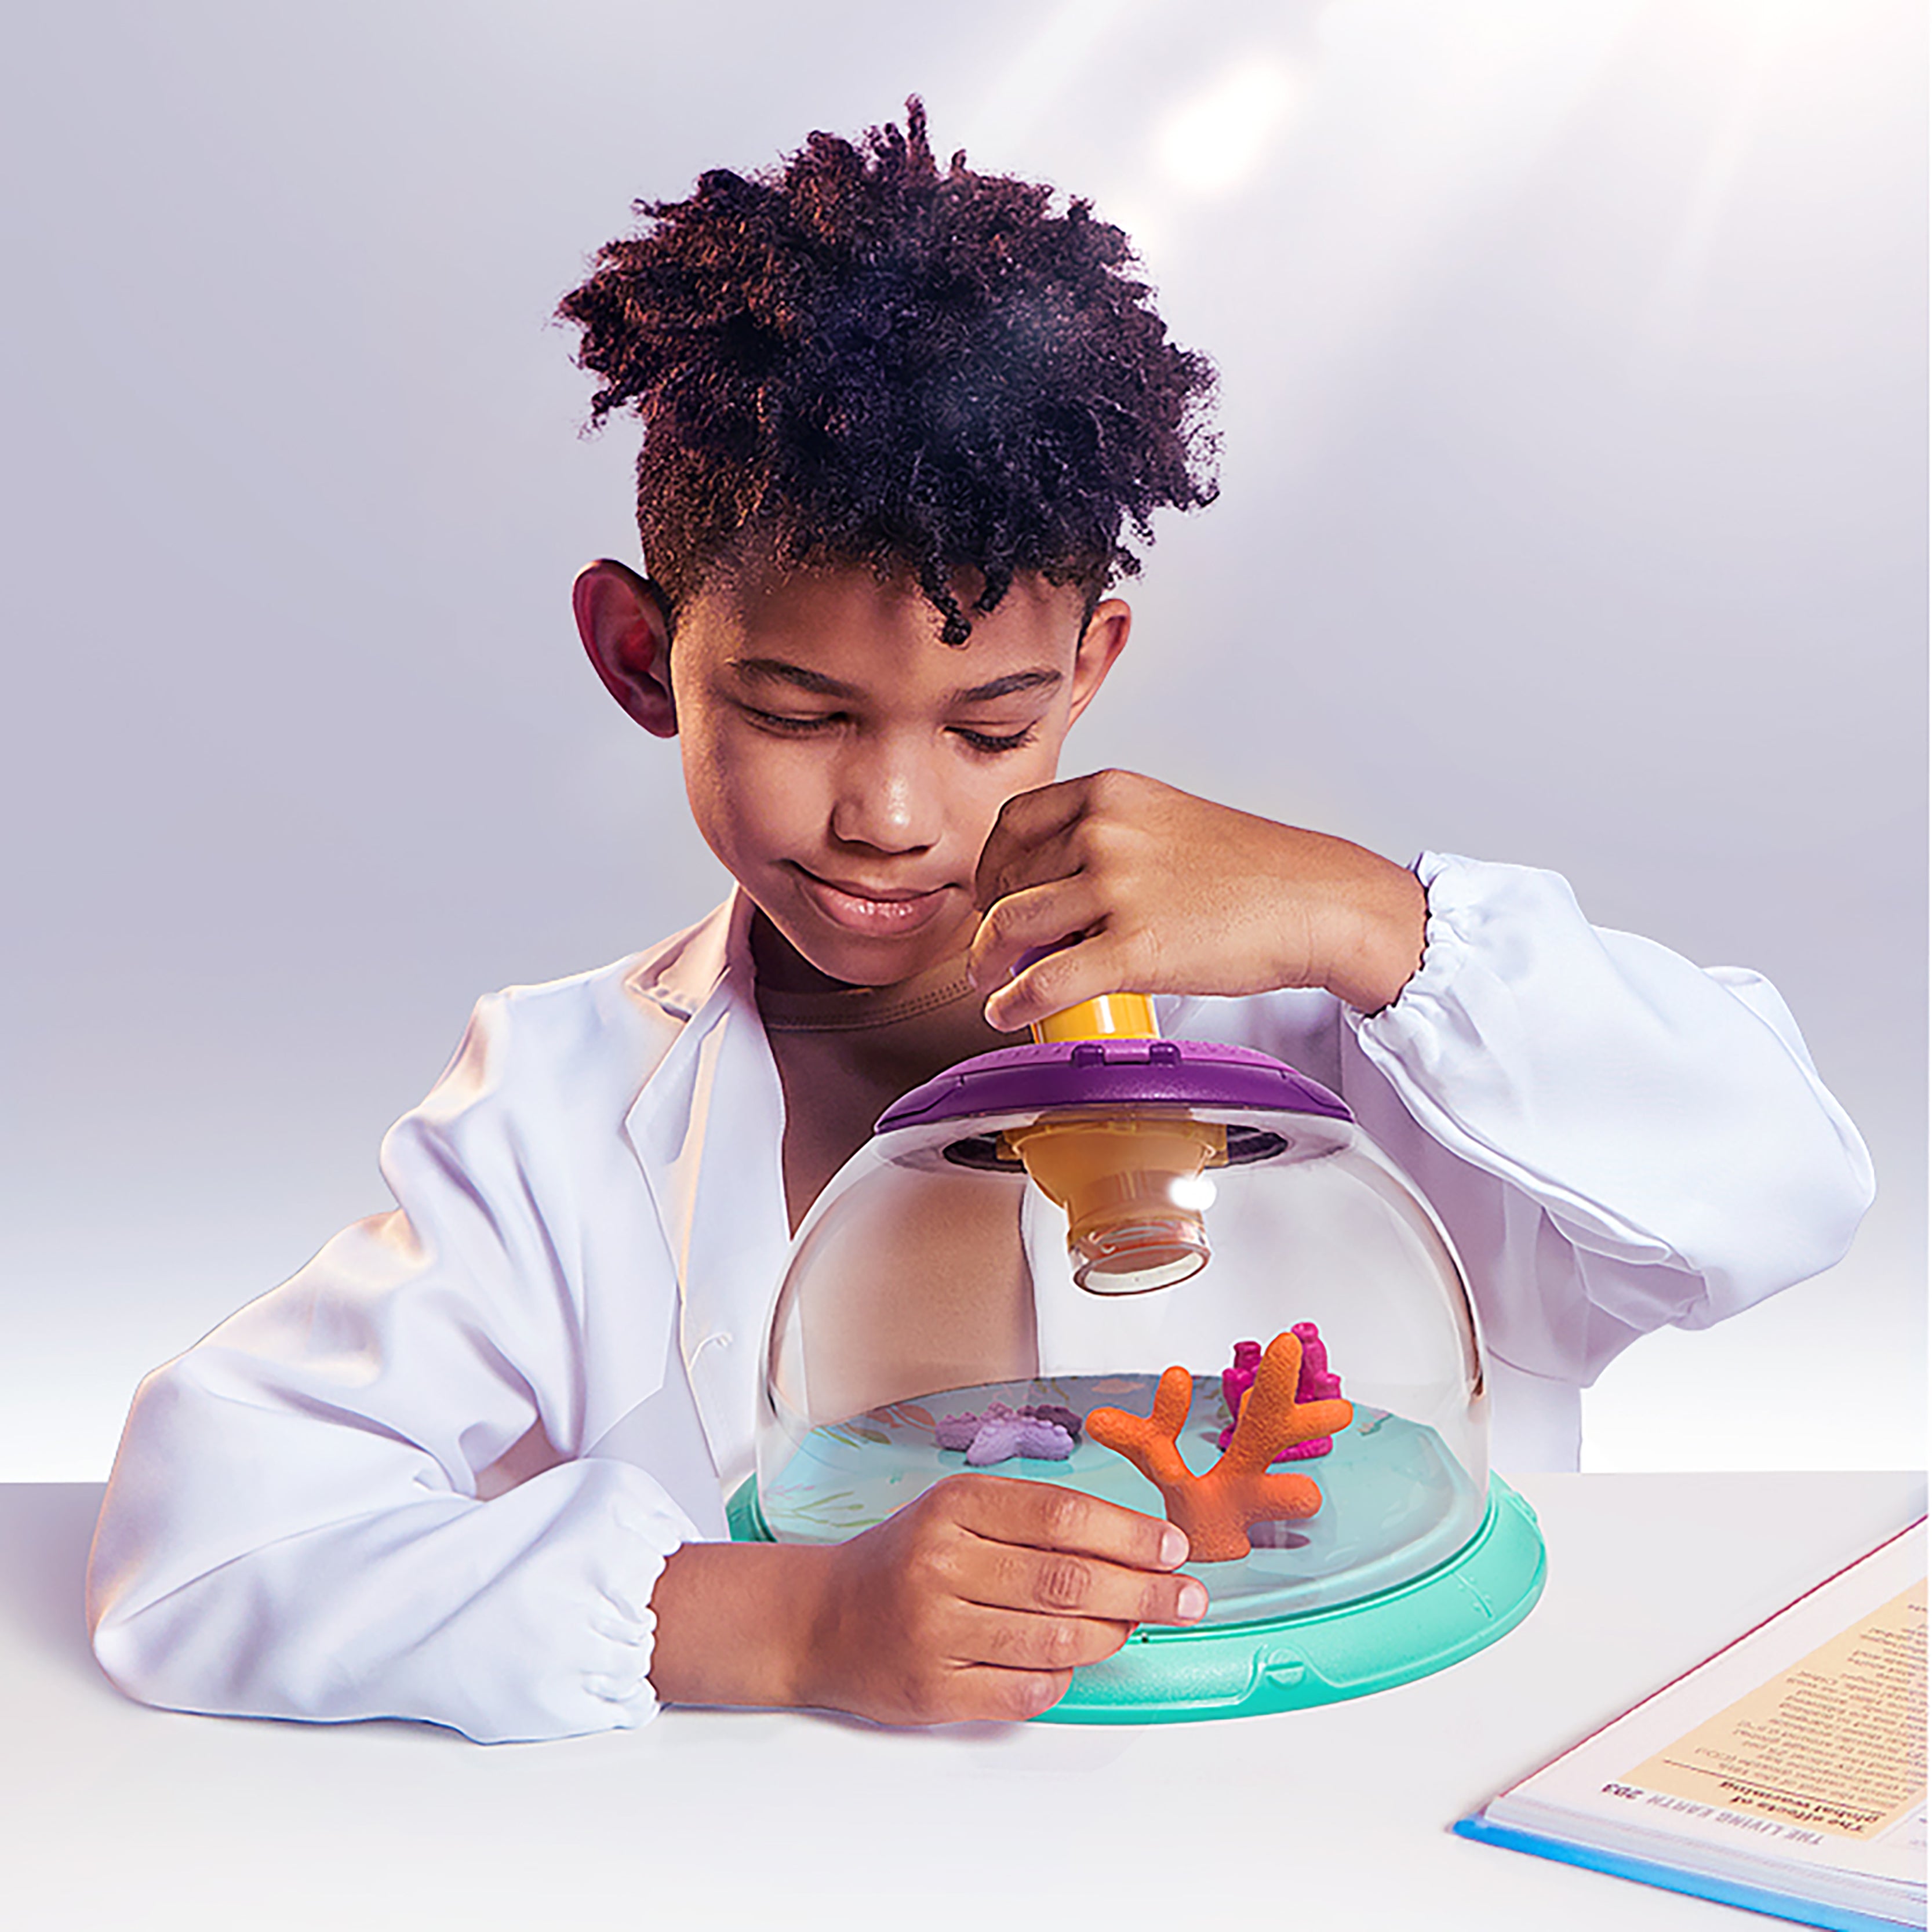 Children learn to think like a scientist. Step by step, they are encouraged to enhance their problem-solving skills and have lots of fun discovering and exploring.